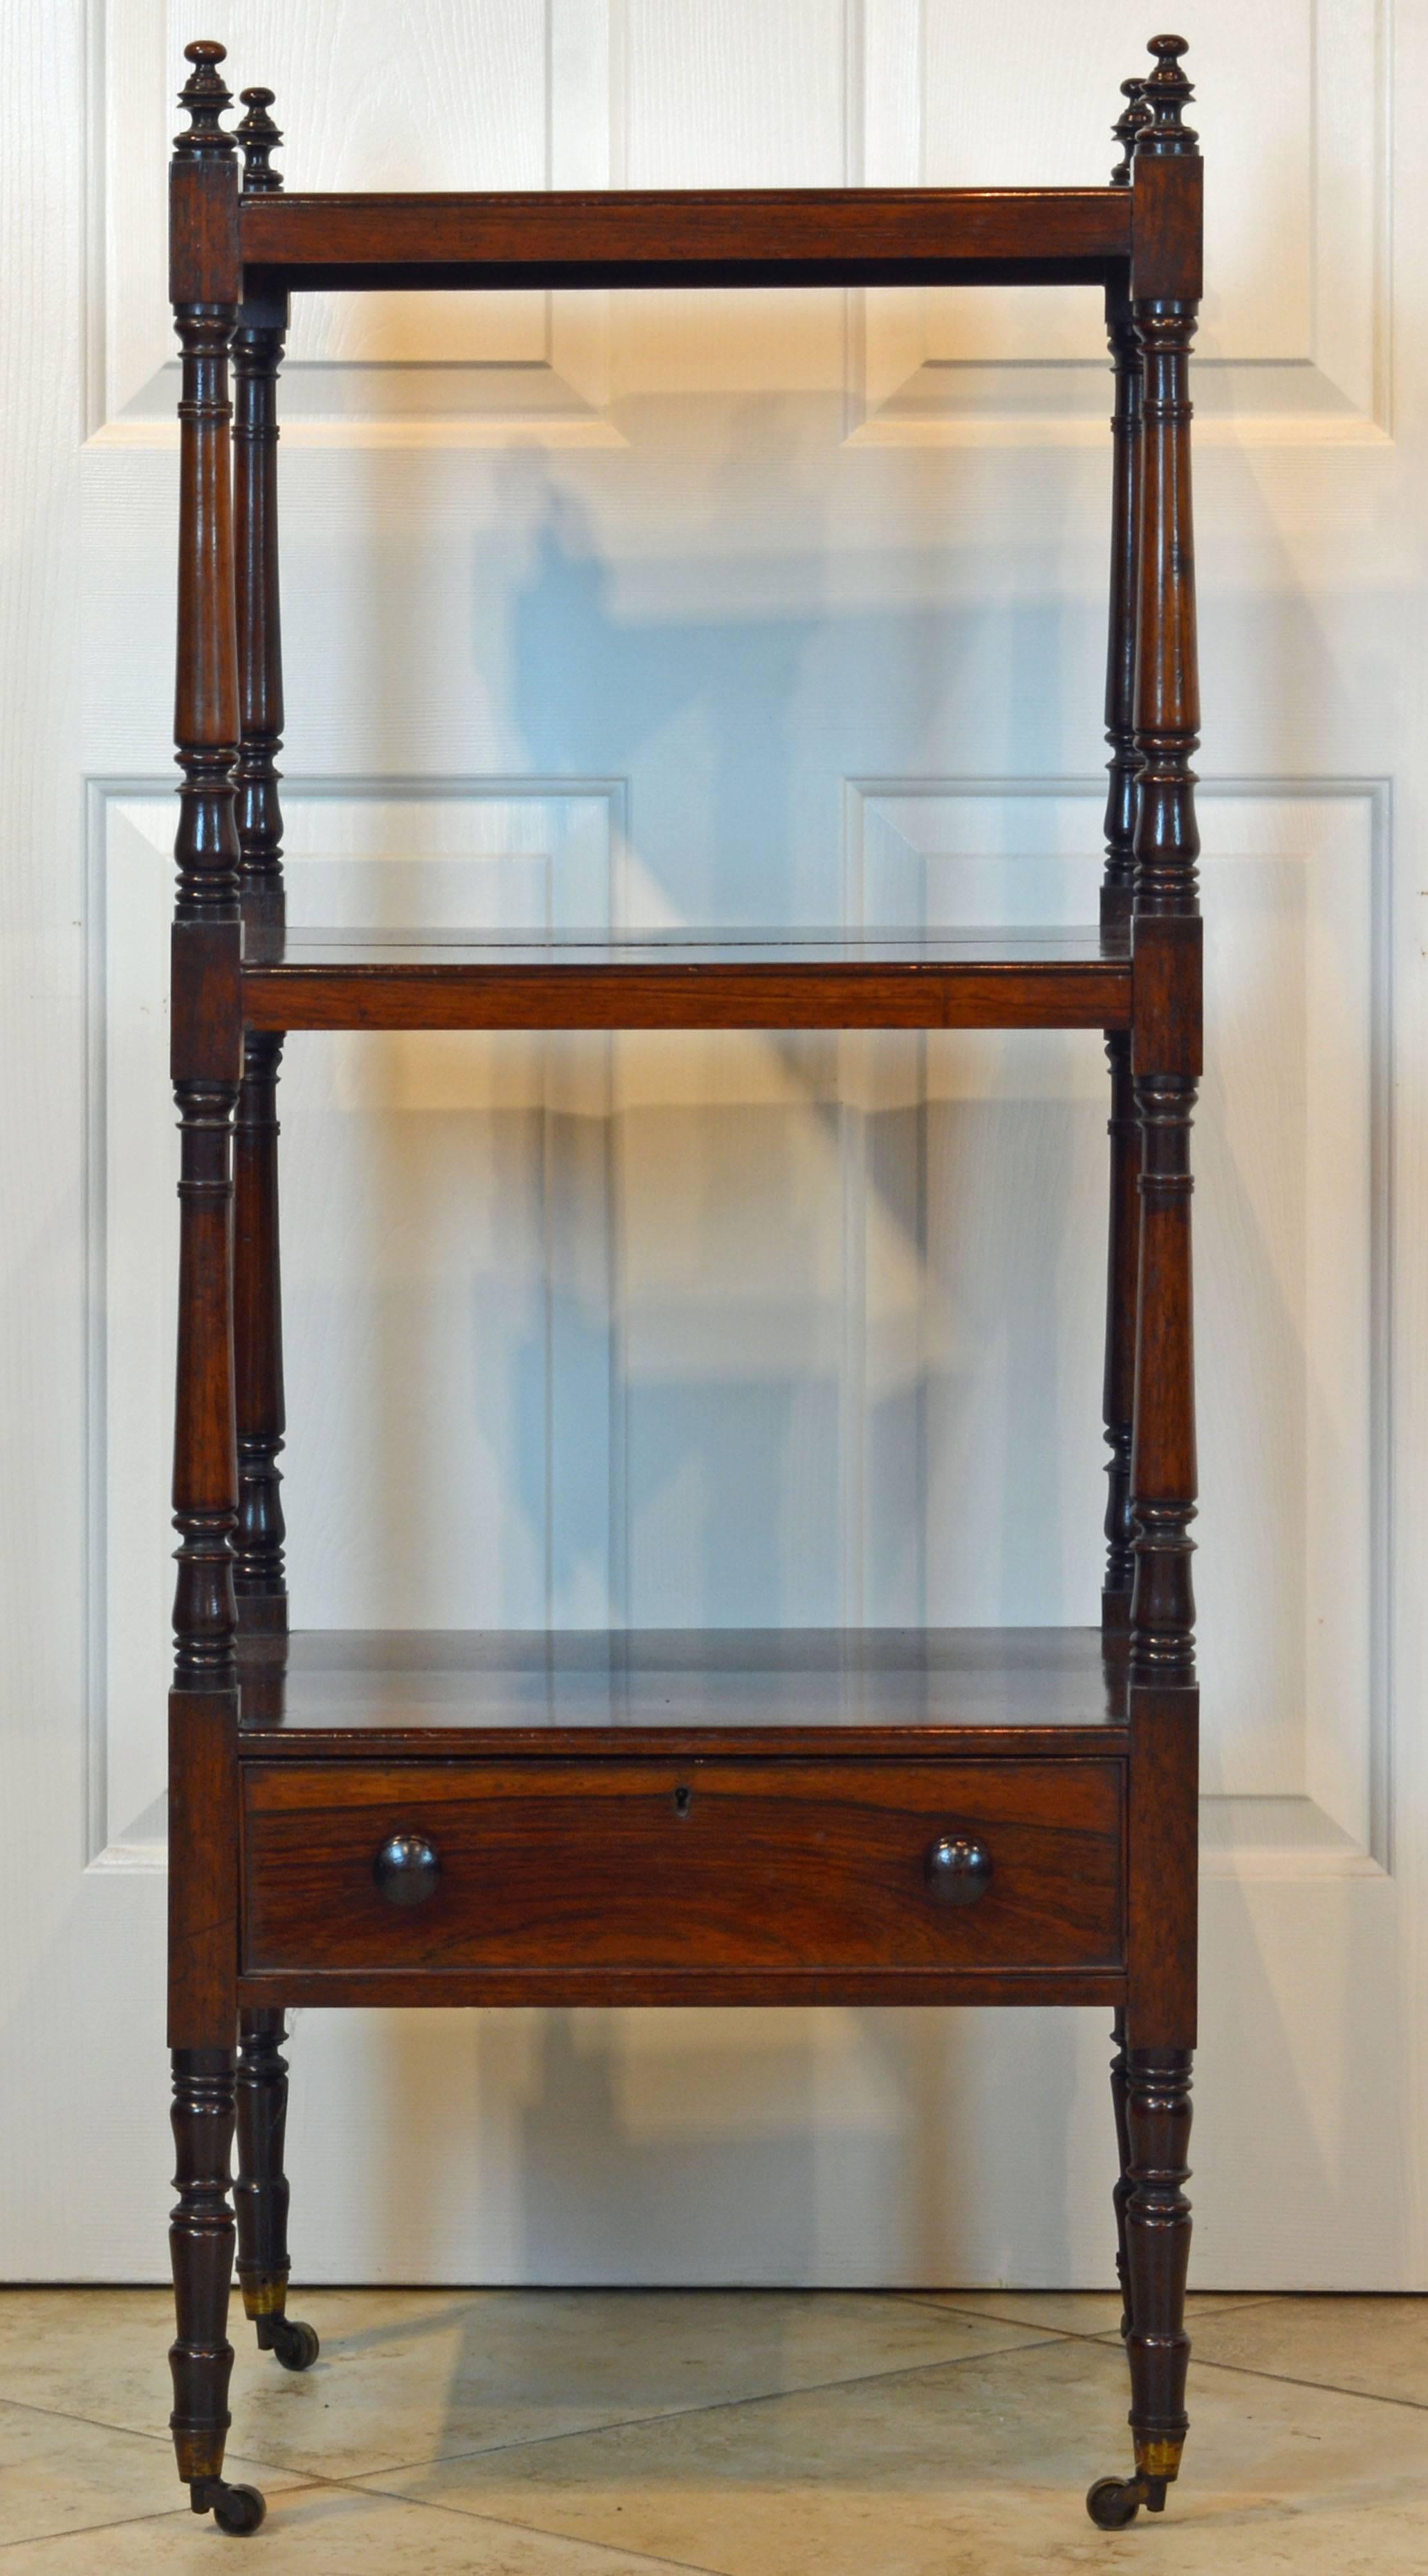 This late Georgian rosewood étagère features three shelves raised on elegantly turned and carved supports surmounted by finials and ending in brass casters. Under the lower shelf a long drawer with turned knobs.